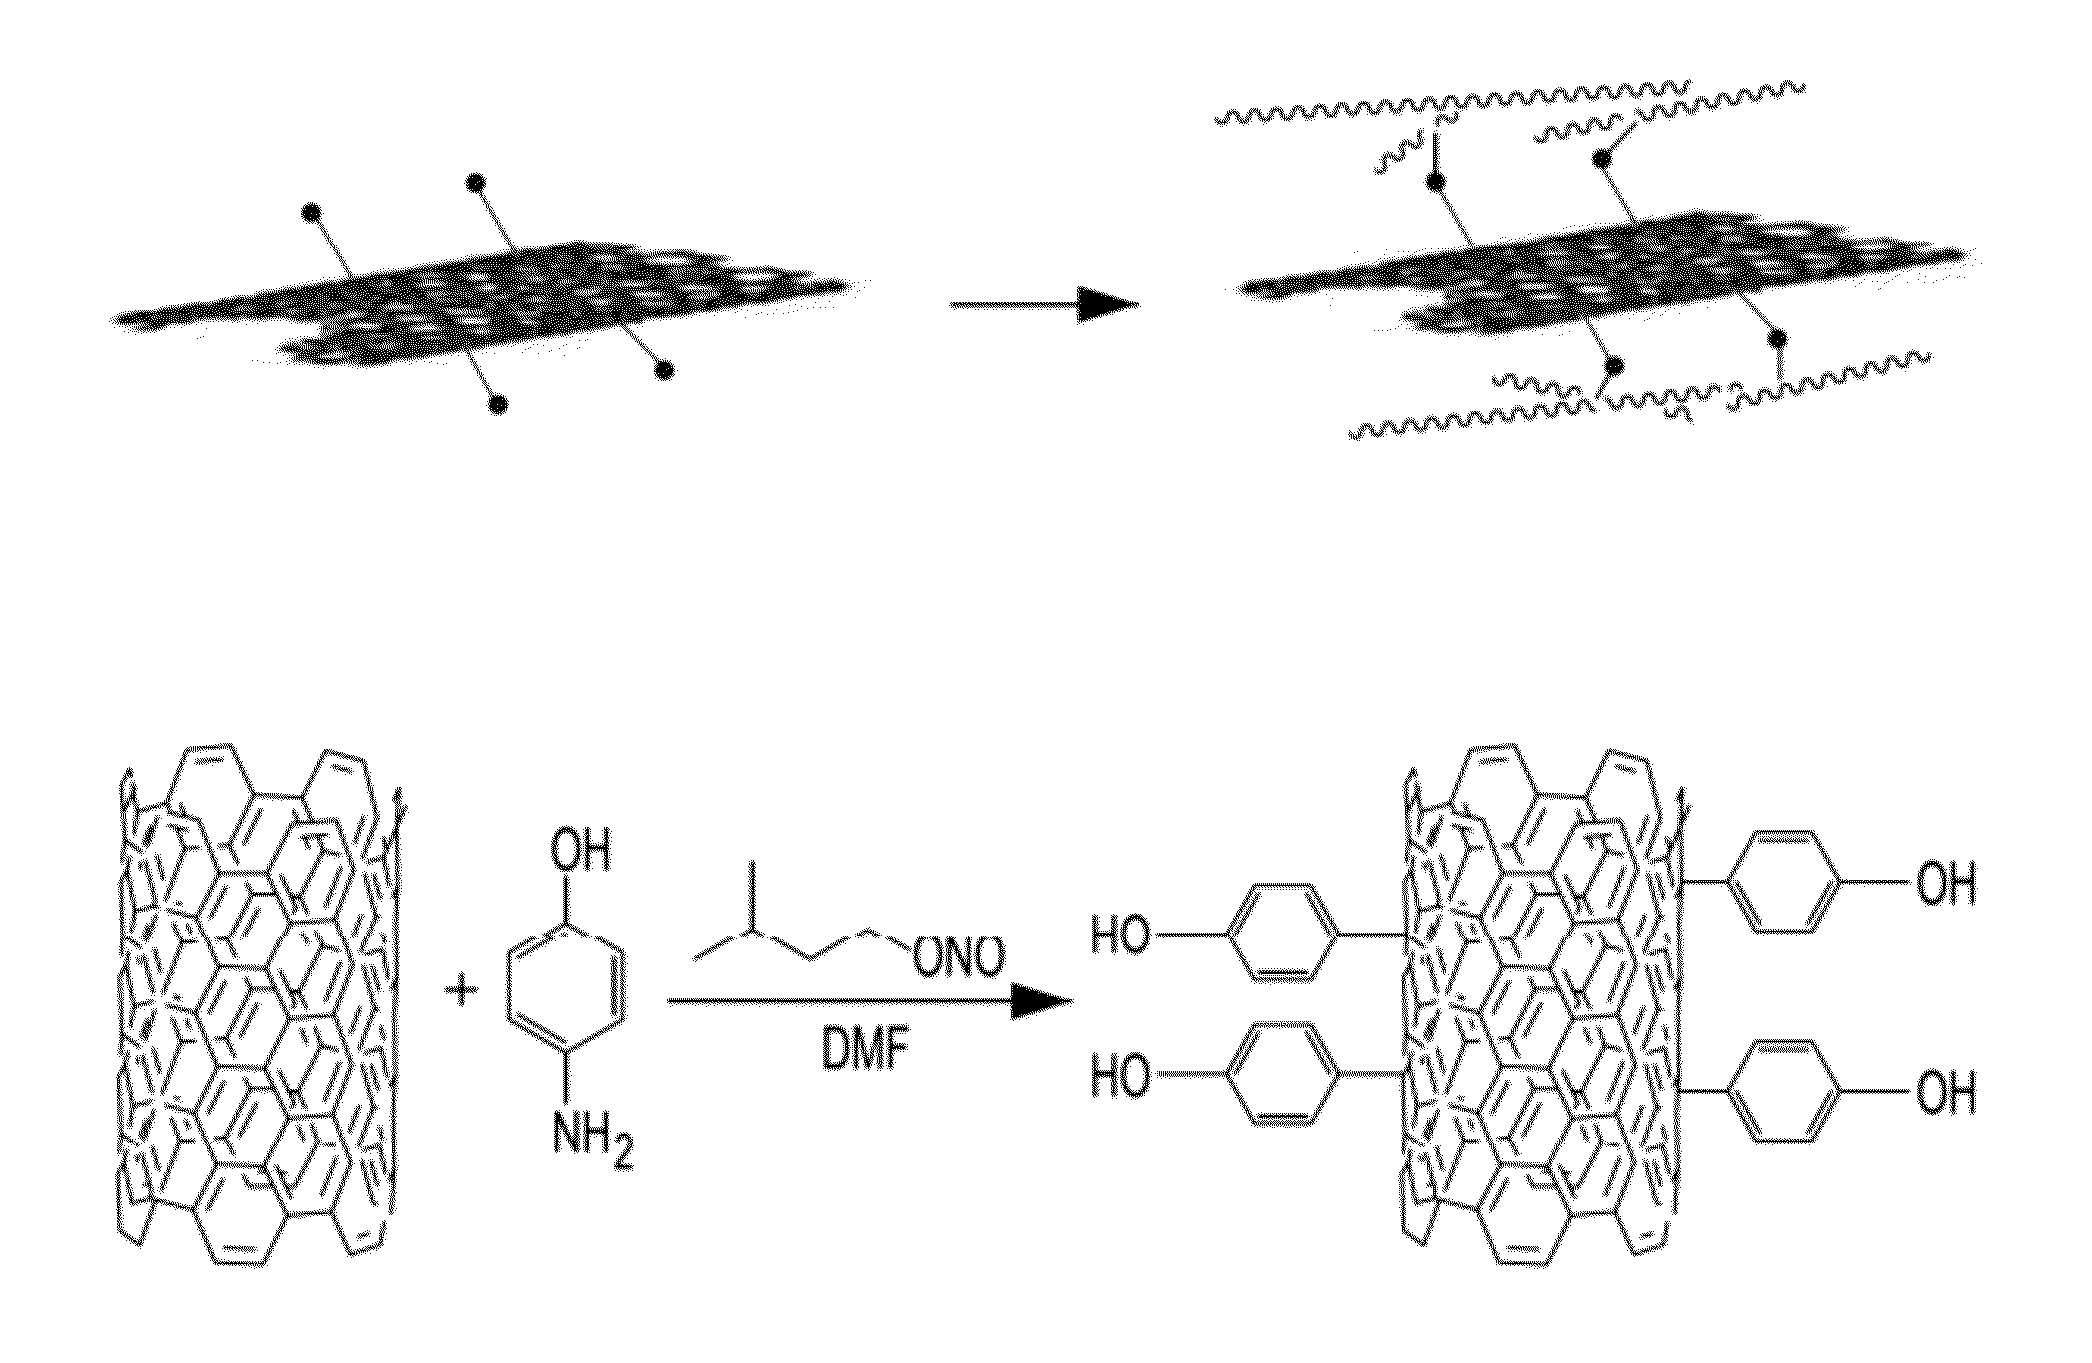 Phenol-formaldehyde polymer with carbon nanotubes, a method of producing same, and products derived therefrom